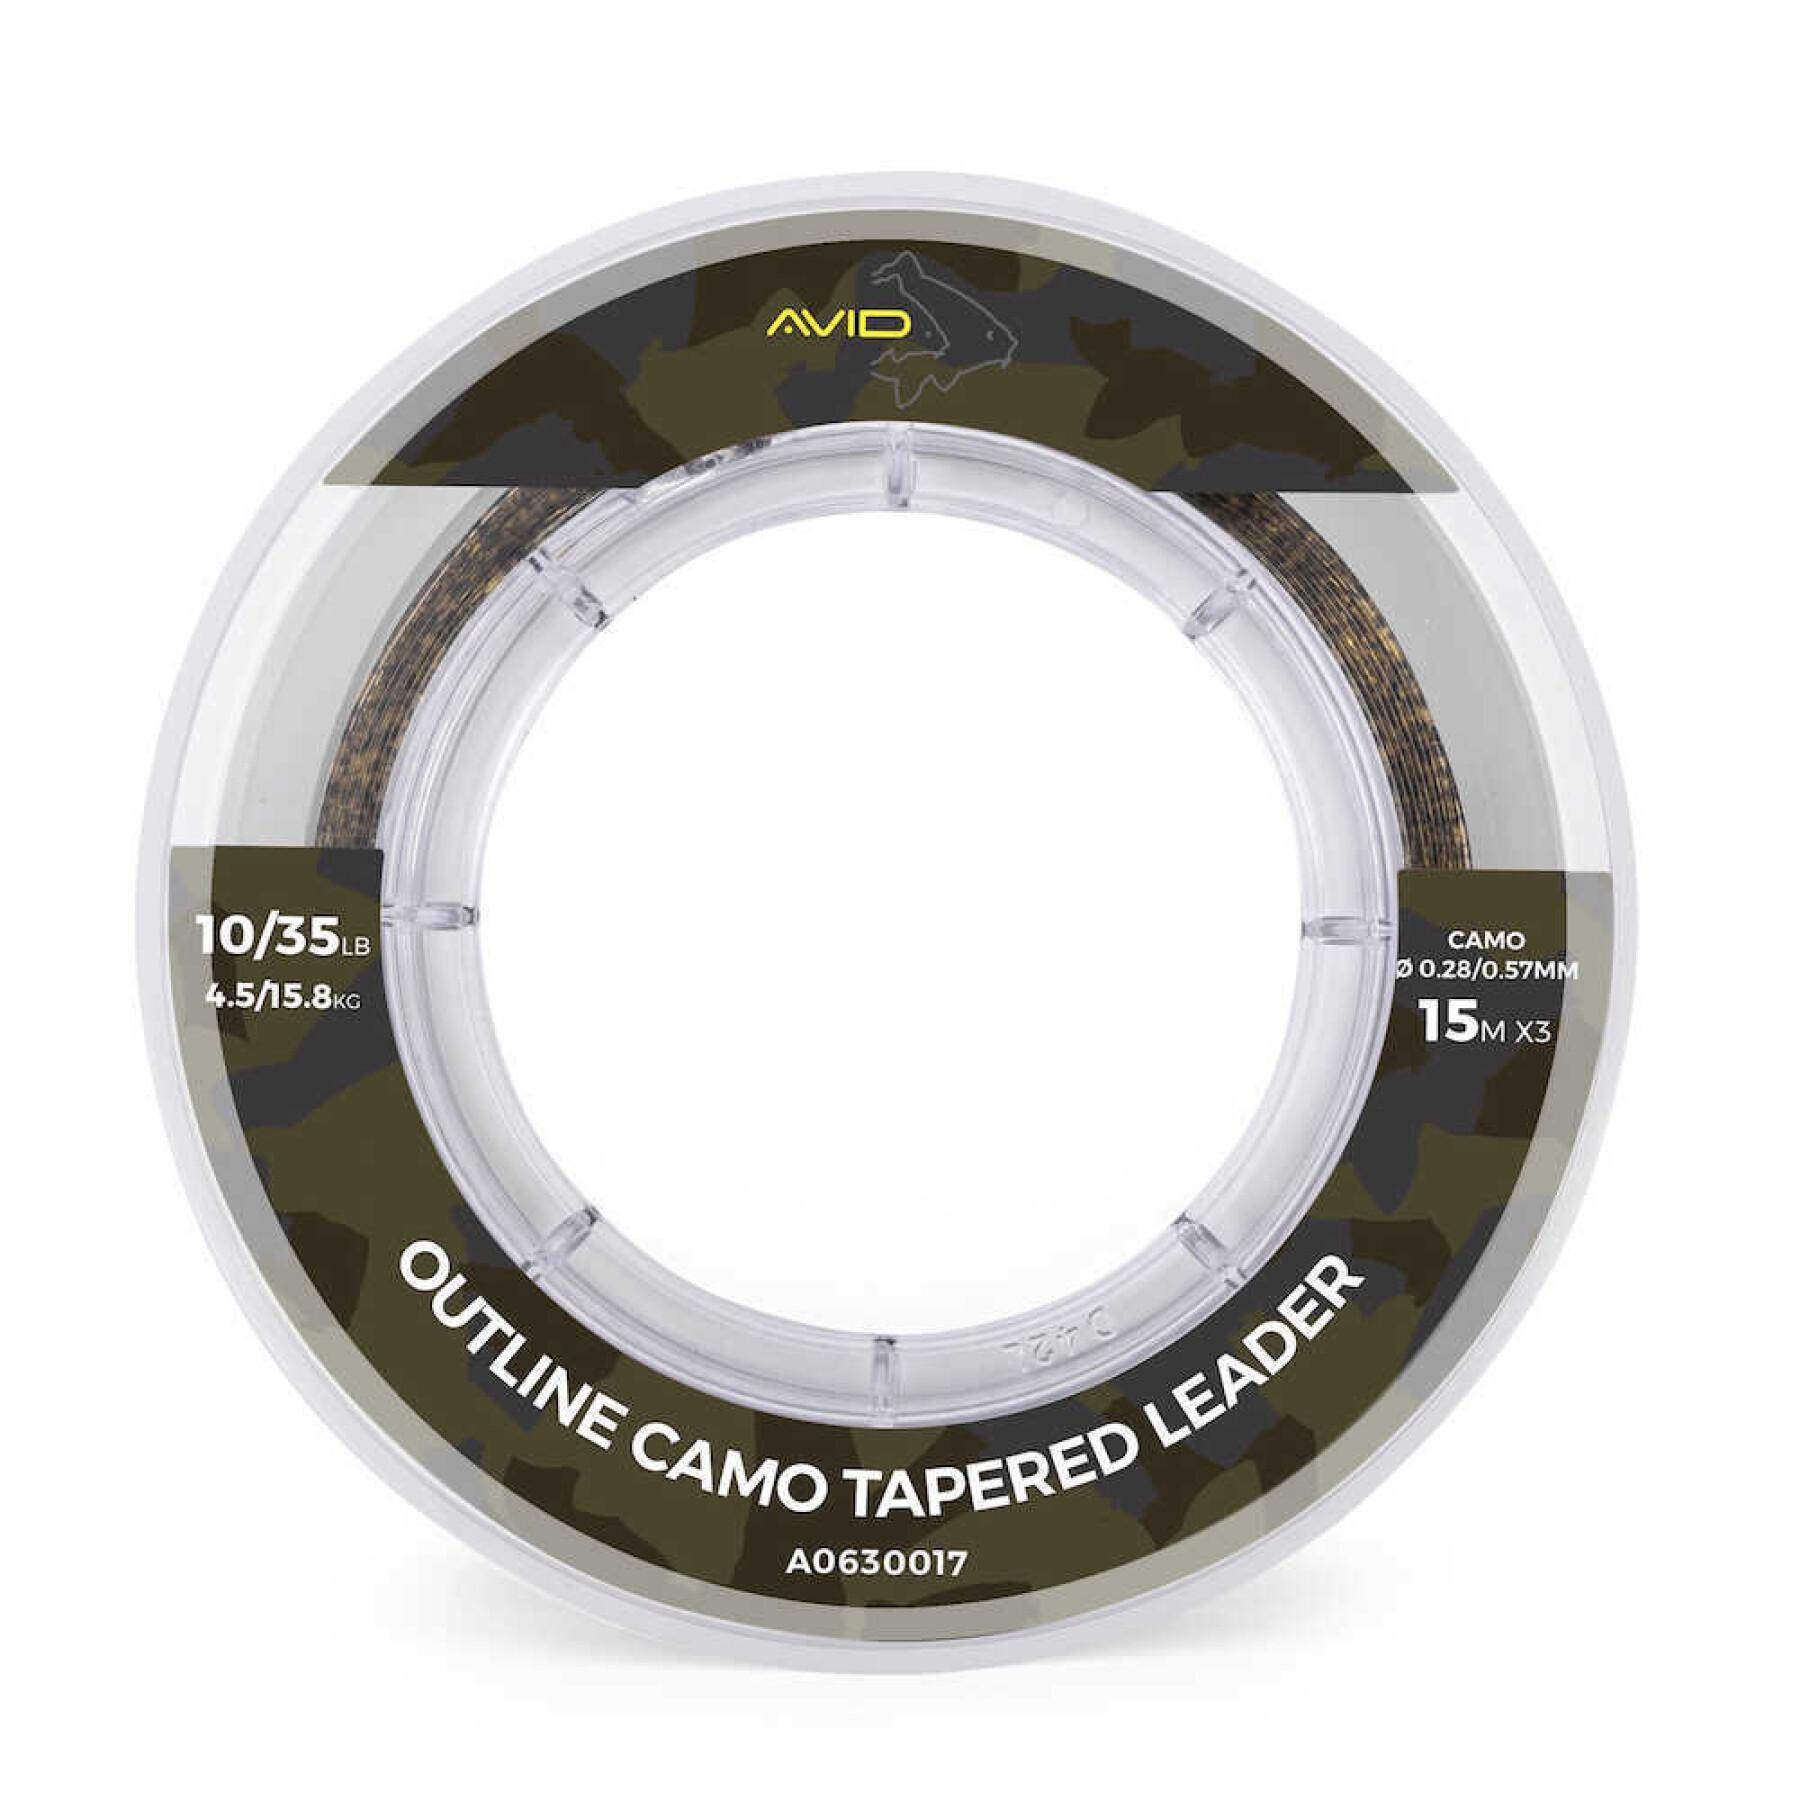 Cutting leader Avid Outline Camo Tapered Leader